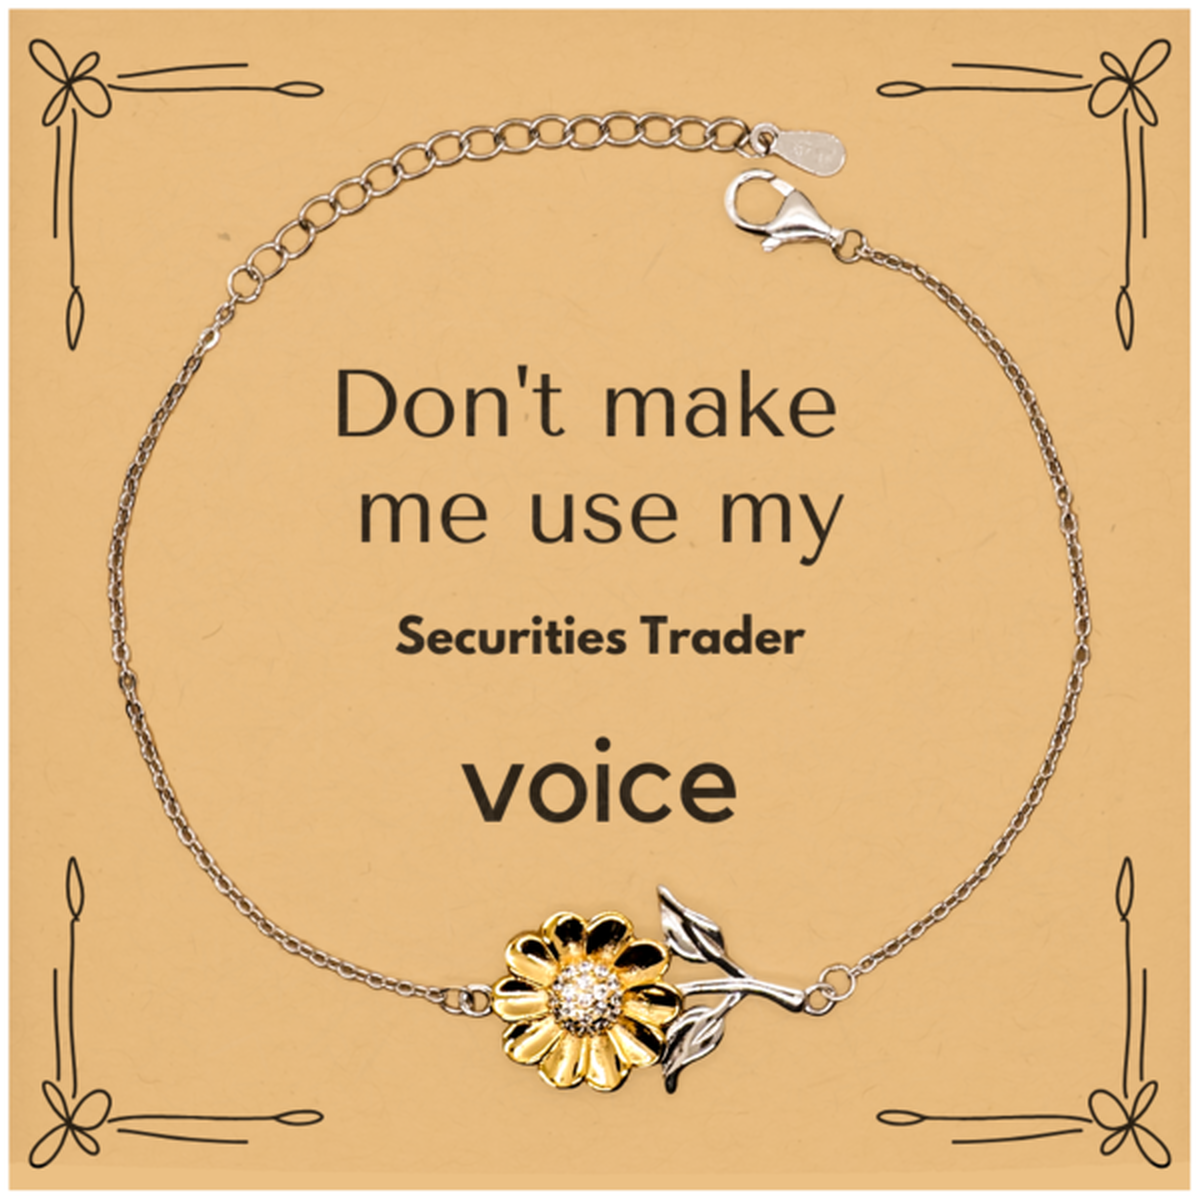 Don't make me use my Securities Trader voice, Sarcasm Securities Trader Card Gifts, Christmas Securities Trader Sunflower Bracelet Birthday Unique Gifts For Securities Trader Coworkers, Men, Women, Colleague, Friends